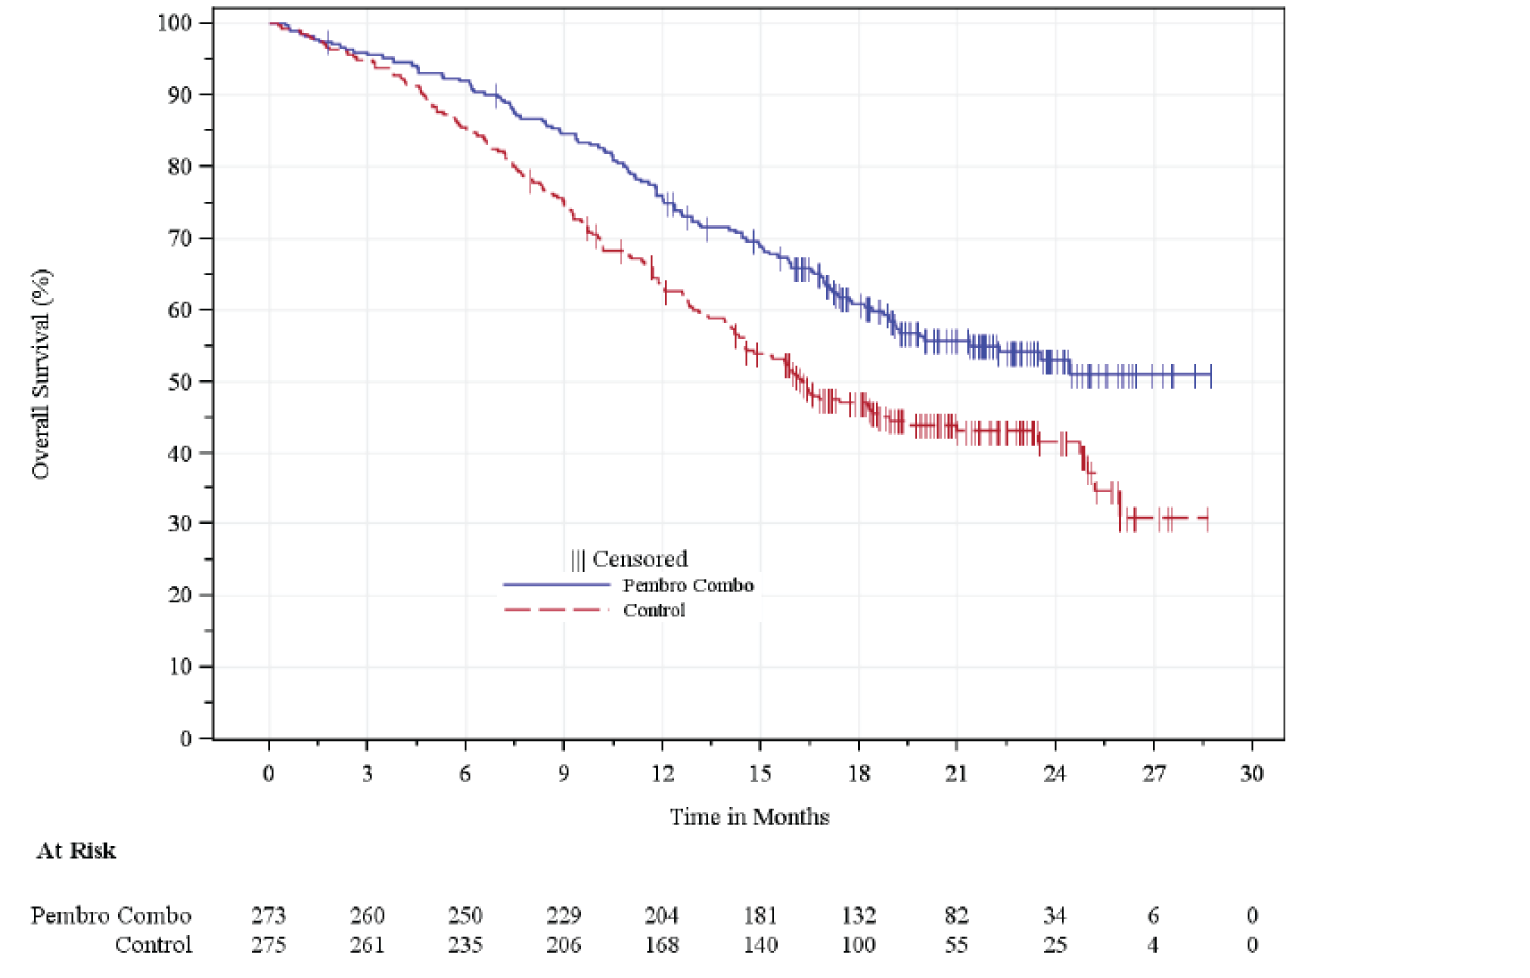 The figure shows the OS Kaplan-Meier curve for the pembrolizumab plus SOC arm and the placebo plus SOC arm. The survival curves separate with the pembrolizumab plus SOC arm above the placebo plus SOC arm around 3 months into the trial and remain separated throughout.